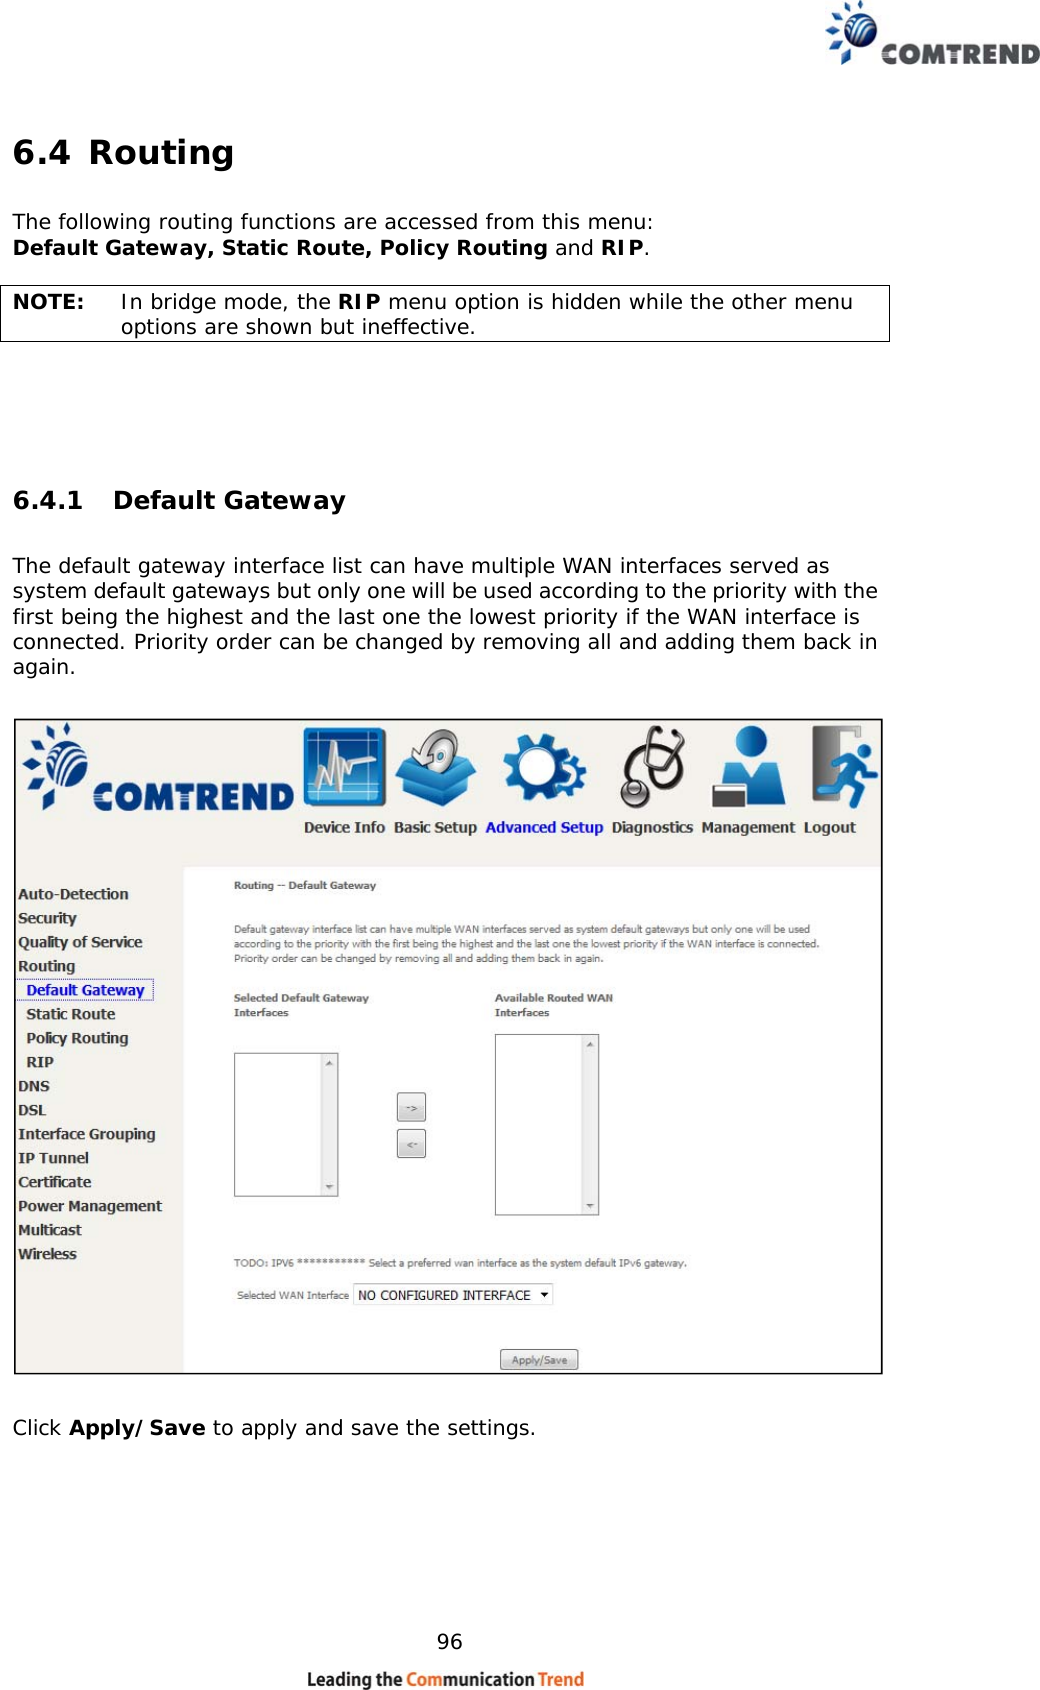    96 6.4 Routing    The following routing functions are accessed from this menu: Default Gateway, Static Route, Policy Routing and RIP.  NOTE:   In bridge mode, the RIP menu option is hidden while the other menu options are shown but ineffective.  6.4.1 Default Gateway The default gateway interface list can have multiple WAN interfaces served as system default gateways but only one will be used according to the priority with the first being the highest and the last one the lowest priority if the WAN interface is connected. Priority order can be changed by removing all and adding them back in again.    Click Apply/Save to apply and save the settings.  